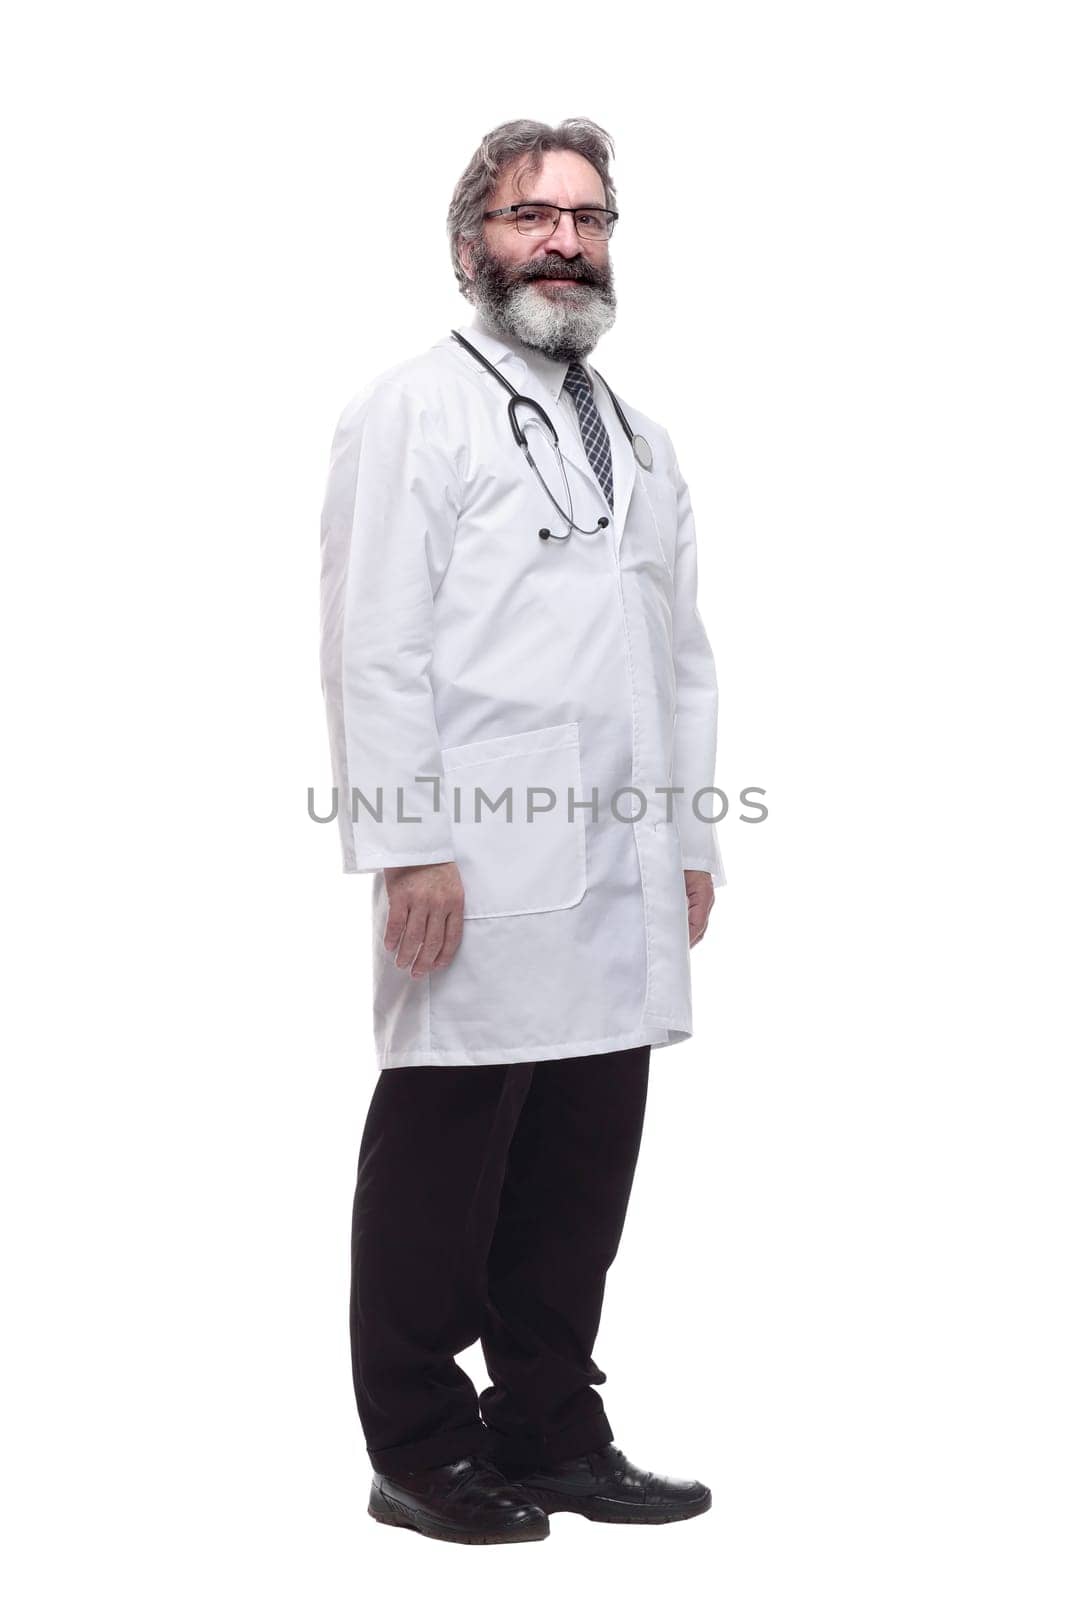 in full growth. senior General practitioner with a stethoscope. isolated on a white background